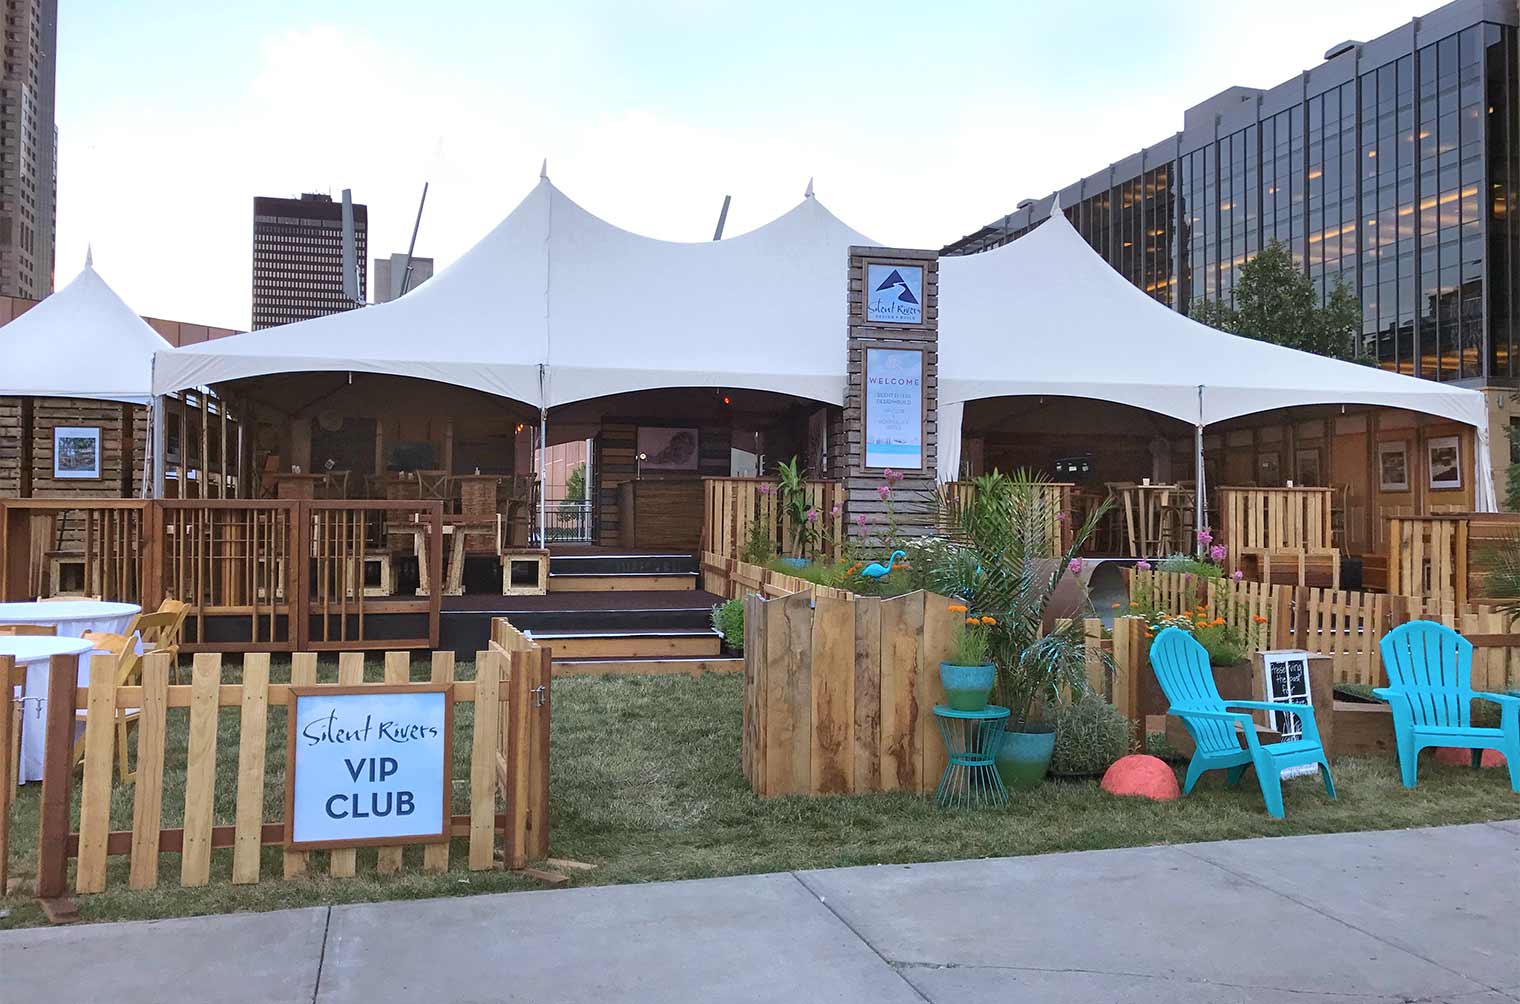 Des Moines Arts Festival Silent Rivers VIP Club and Hospitality Suites is setup and ready to host Festival Patrons